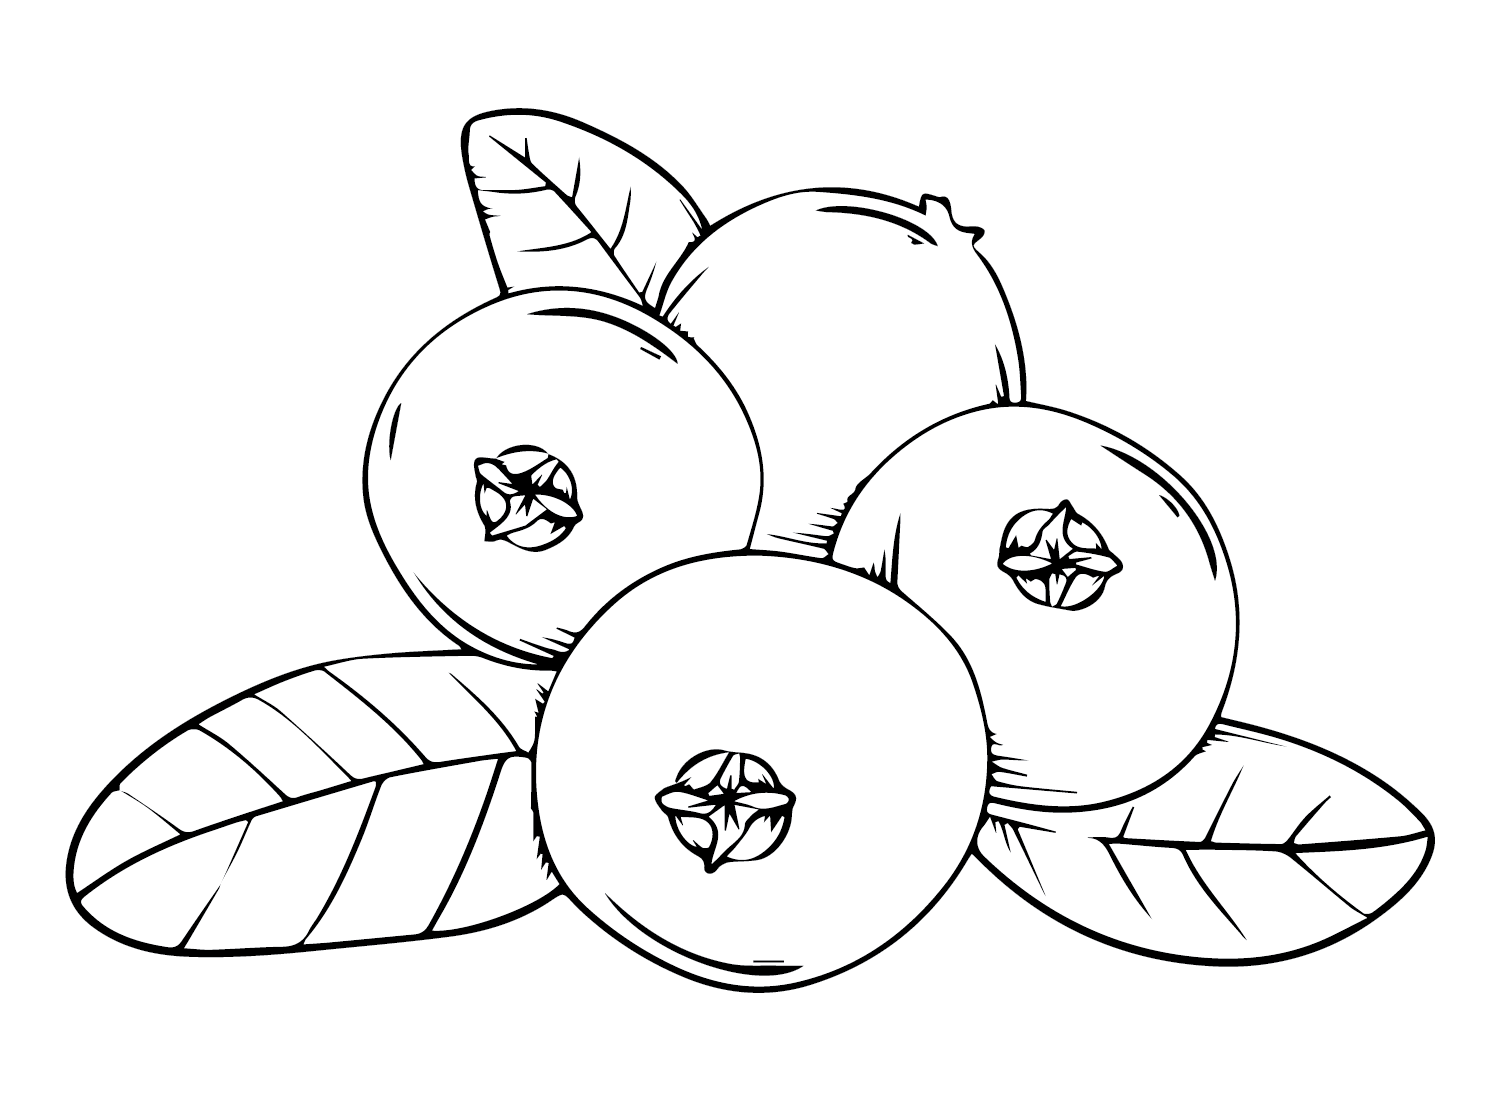 Cranberry Sprite Coloring Page